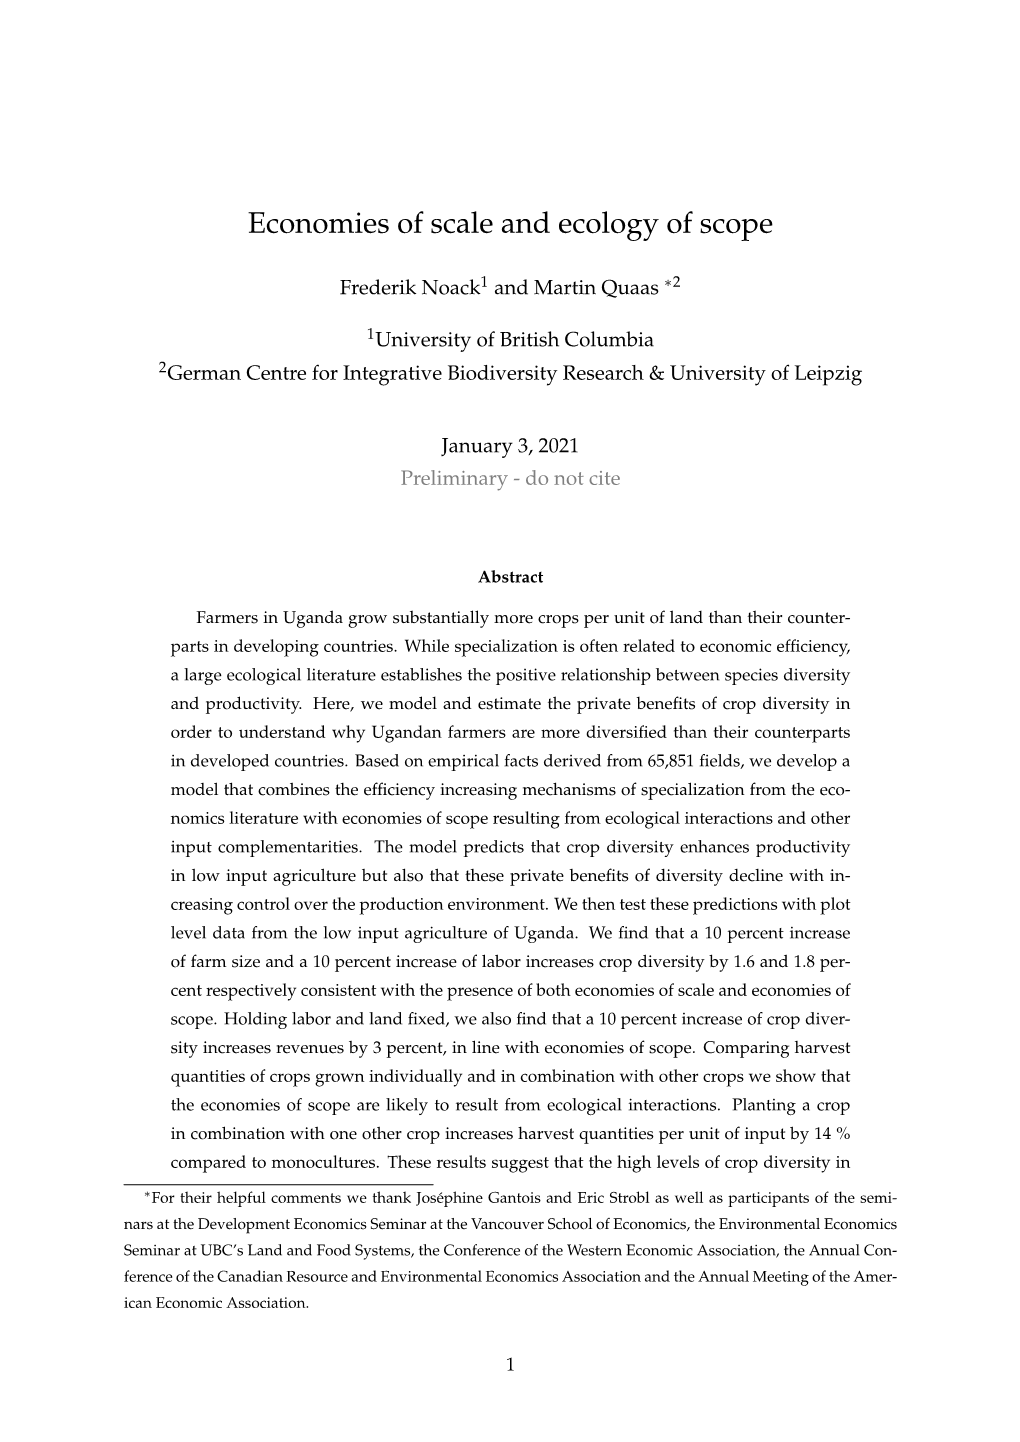 Economies of Scale and Ecology of Scope